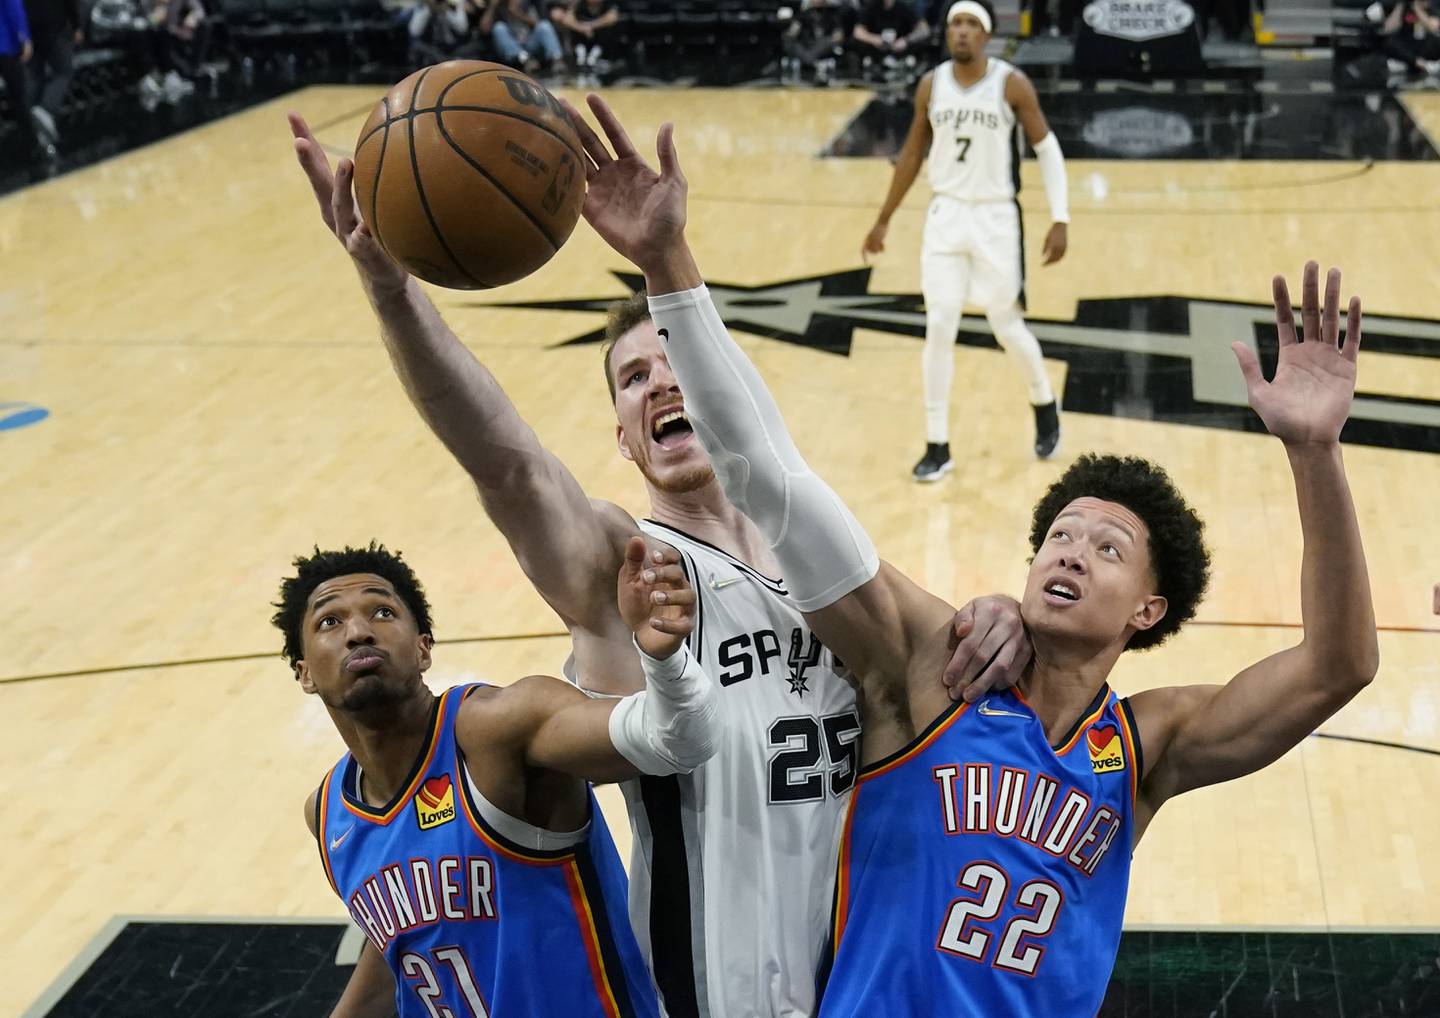 San Antonio Spurs center Jakob Poeltl (25) battles Oklahoma City Thunder guard Aaron Wiggins (21) and forward Isaiah Roby (22) for a rebound during the second half Wednesday, March 16, 2022, in San Antonio. (AP Photo/Eric Gay)